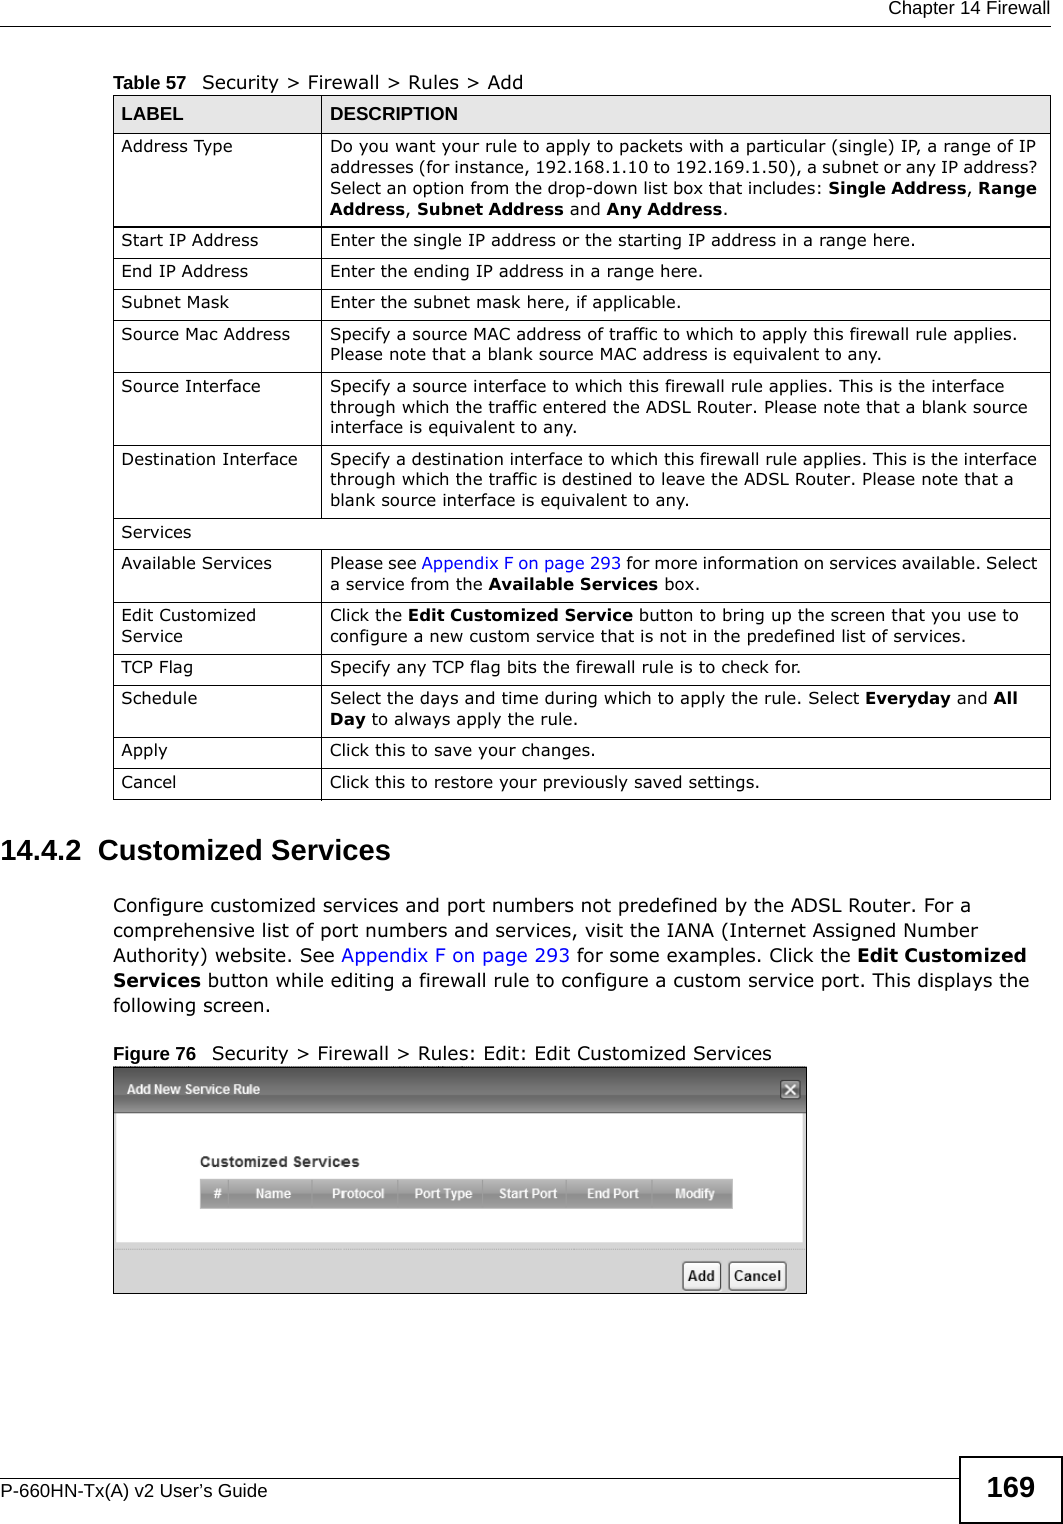  Chapter 14 FirewallP-660HN-Tx(A) v2 User’s Guide 16914.4.2  Customized Services Configure customized services and port numbers not predefined by the ADSL Router. For a comprehensive list of port numbers and services, visit the IANA (Internet Assigned Number Authority) website. See Appendix F on page 293 for some examples. Click the Edit Customized Services button while editing a firewall rule to configure a custom service port. This displays the following screen.Figure 76   Security &gt; Firewall &gt; Rules: Edit: Edit Customized ServicesAddress Type Do you want your rule to apply to packets with a particular (single) IP, a range of IP addresses (for instance, 192.168.1.10 to 192.169.1.50), a subnet or any IP address? Select an option from the drop-down list box that includes: Single Address, Range Address, Subnet Address and Any Address. Start IP Address Enter the single IP address or the starting IP address in a range here. End IP Address Enter the ending IP address in a range here.Subnet Mask Enter the subnet mask here, if applicable.Source Mac Address Specify a source MAC address of traffic to which to apply this firewall rule applies. Please note that a blank source MAC address is equivalent to any.Source Interface Specify a source interface to which this firewall rule applies. This is the interface through which the traffic entered the ADSL Router. Please note that a blank source interface is equivalent to any.Destination Interface Specify a destination interface to which this firewall rule applies. This is the interface through which the traffic is destined to leave the ADSL Router. Please note that a blank source interface is equivalent to any.ServicesAvailable Services Please see Appendix F on page 293 for more information on services available. Select a service from the Available Services box.Edit Customized ServiceClick the Edit Customized Service button to bring up the screen that you use to configure a new custom service that is not in the predefined list of services.TCP Flag Specify any TCP flag bits the firewall rule is to check for.Schedule Select the days and time during which to apply the rule. Select Everyday and All Day to always apply the rule.Apply Click this to save your changes.Cancel Click this to restore your previously saved settings.Table 57   Security &gt; Firewall &gt; Rules &gt; Add LABEL DESCRIPTION